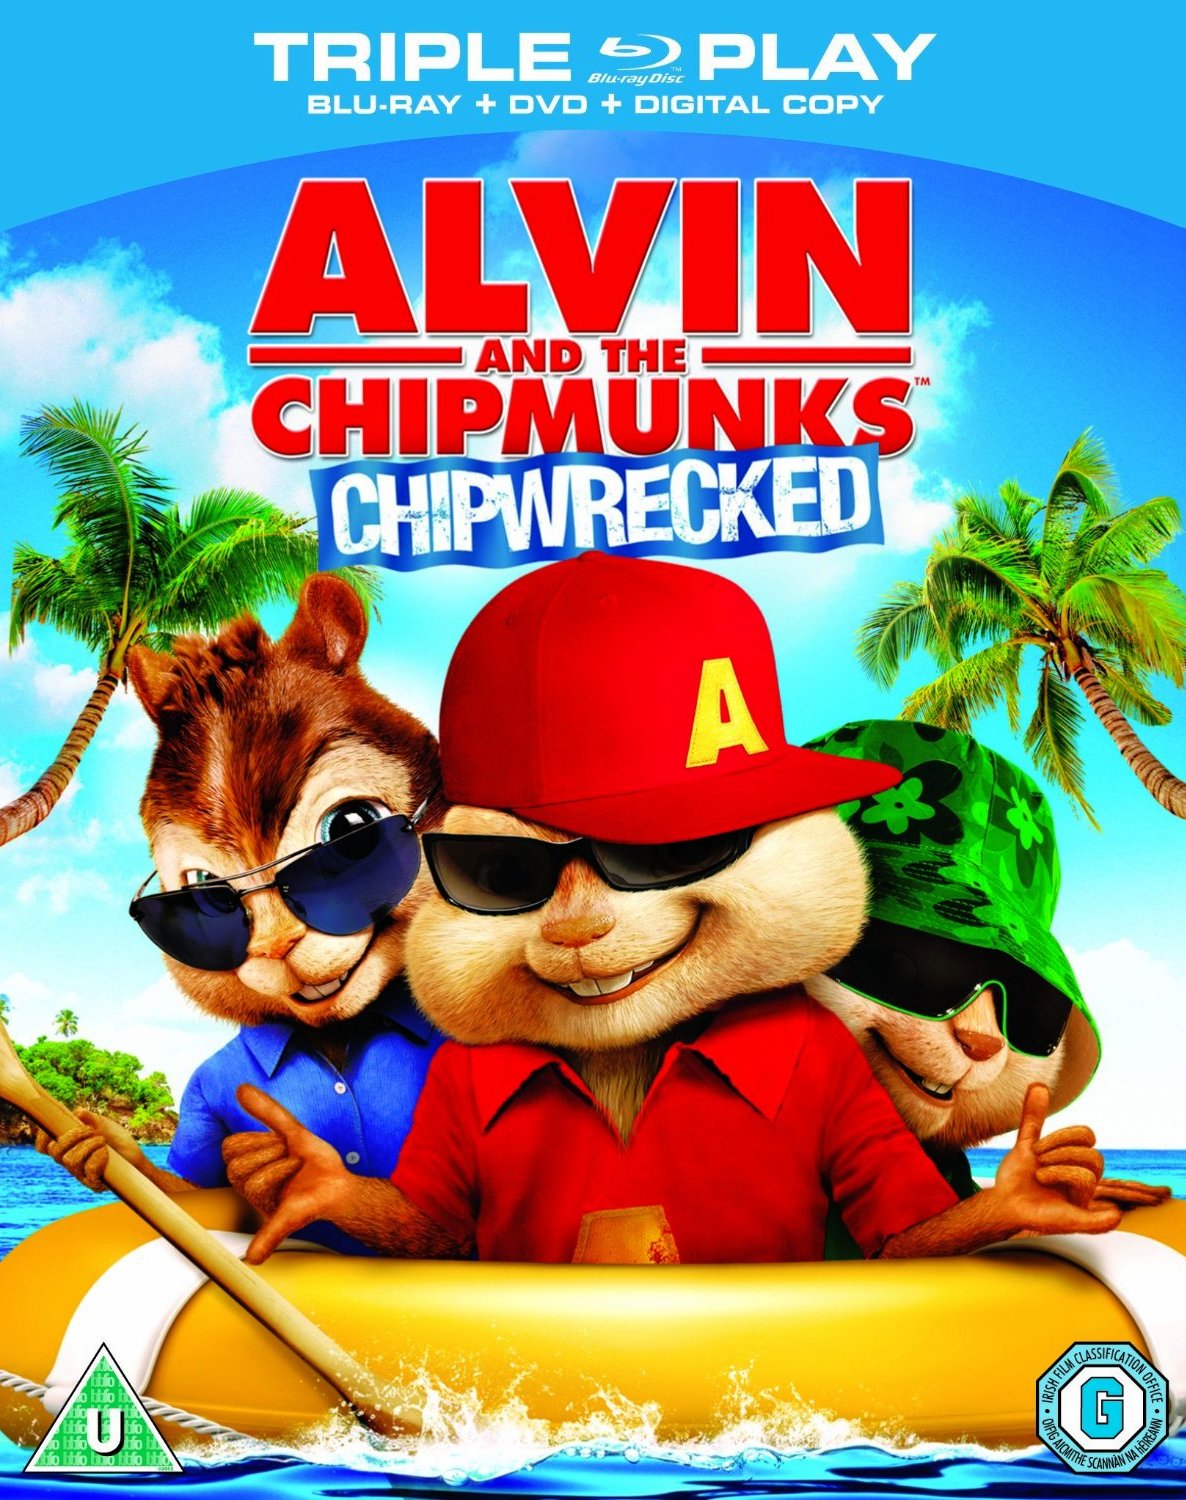 “Alvin and the Chipmunks: Chipwrecked” Reviewed by my inner Five-Year-Old